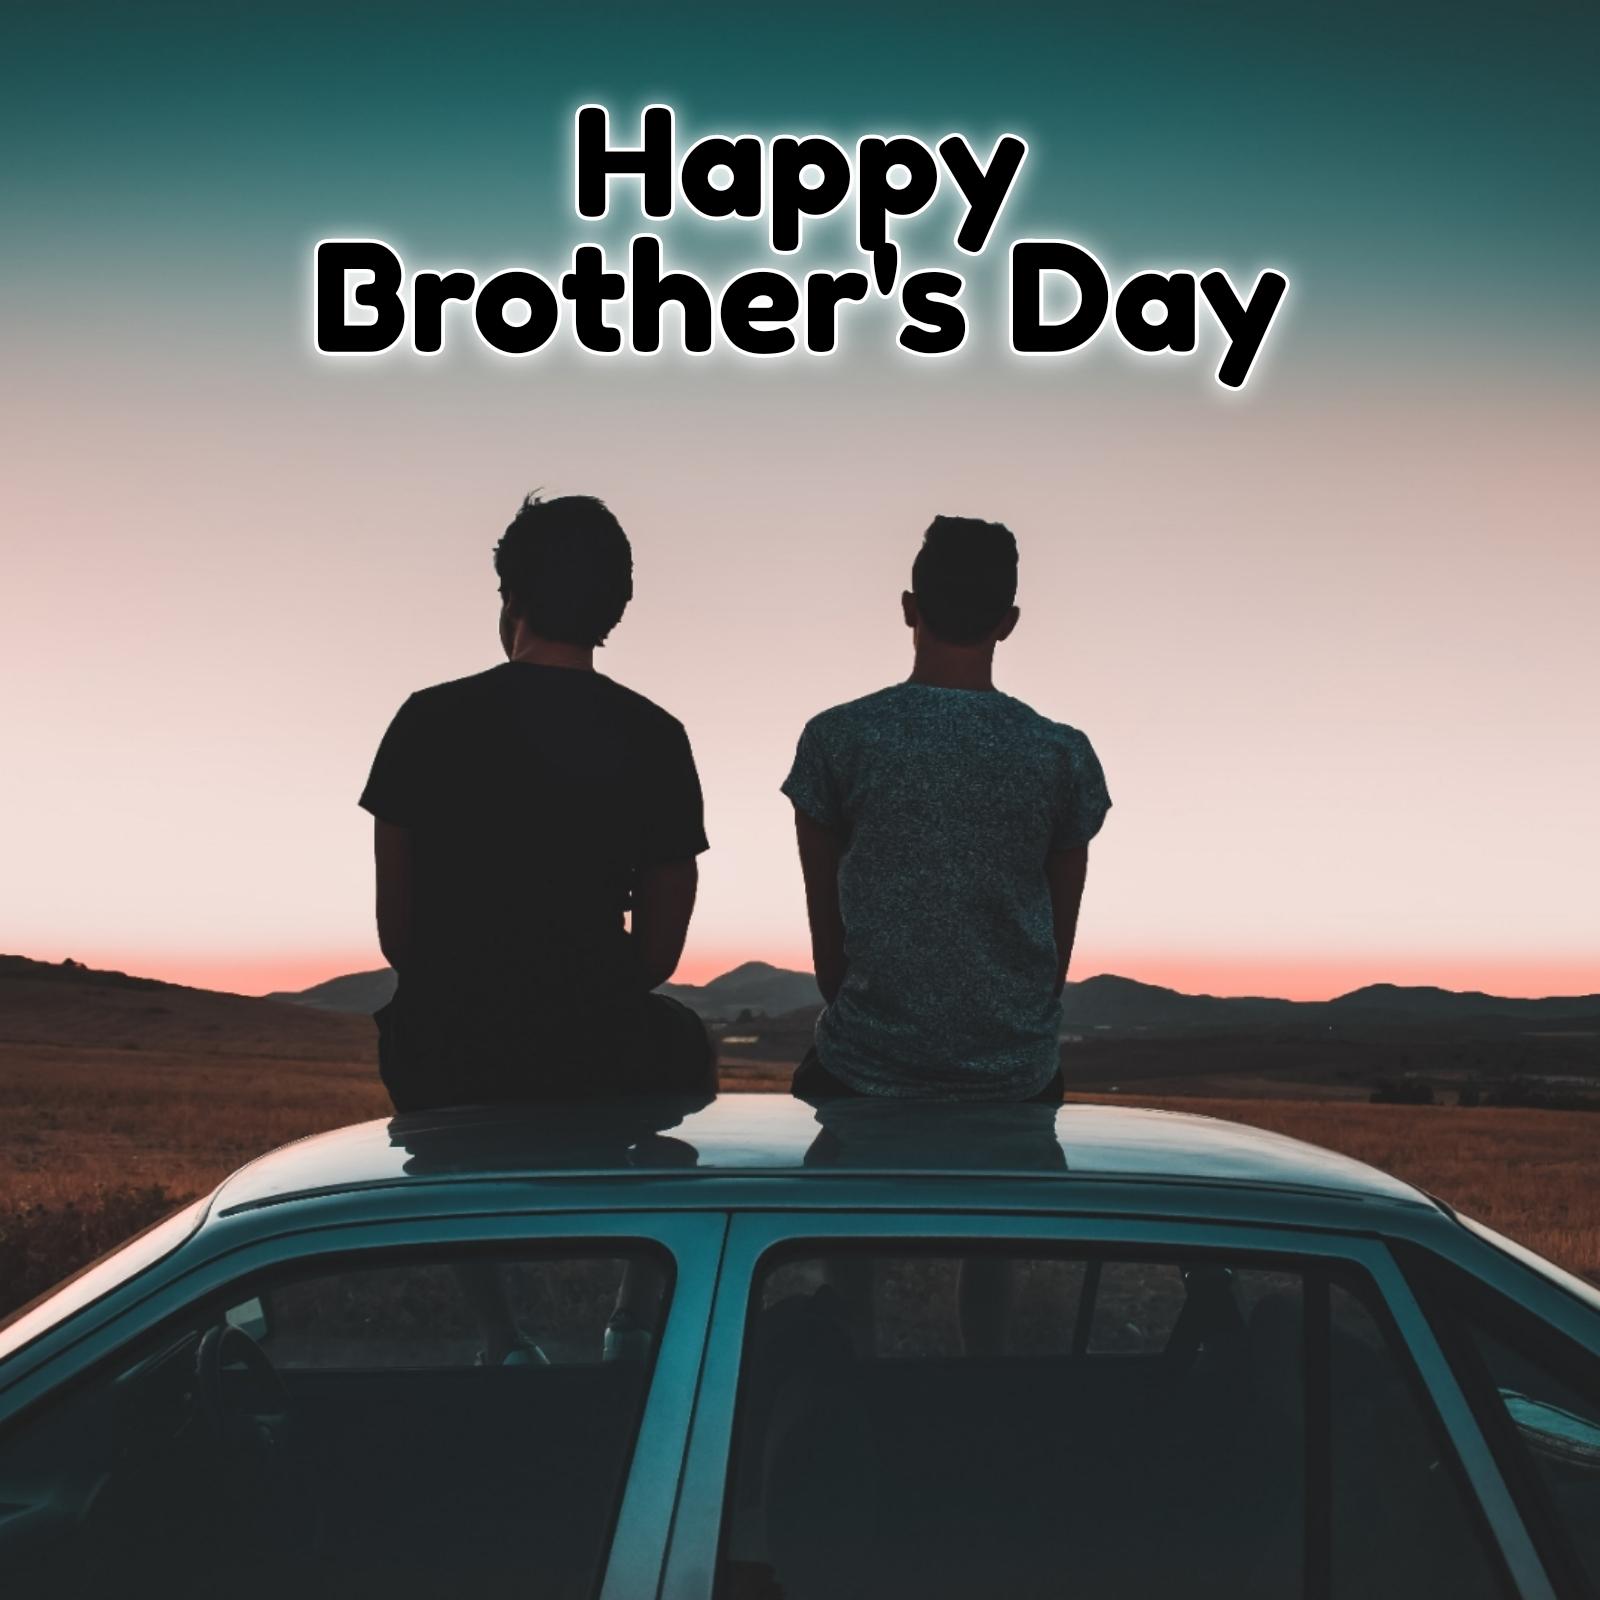 Happy Brothers Day Wishes, Greetings & Messages Images